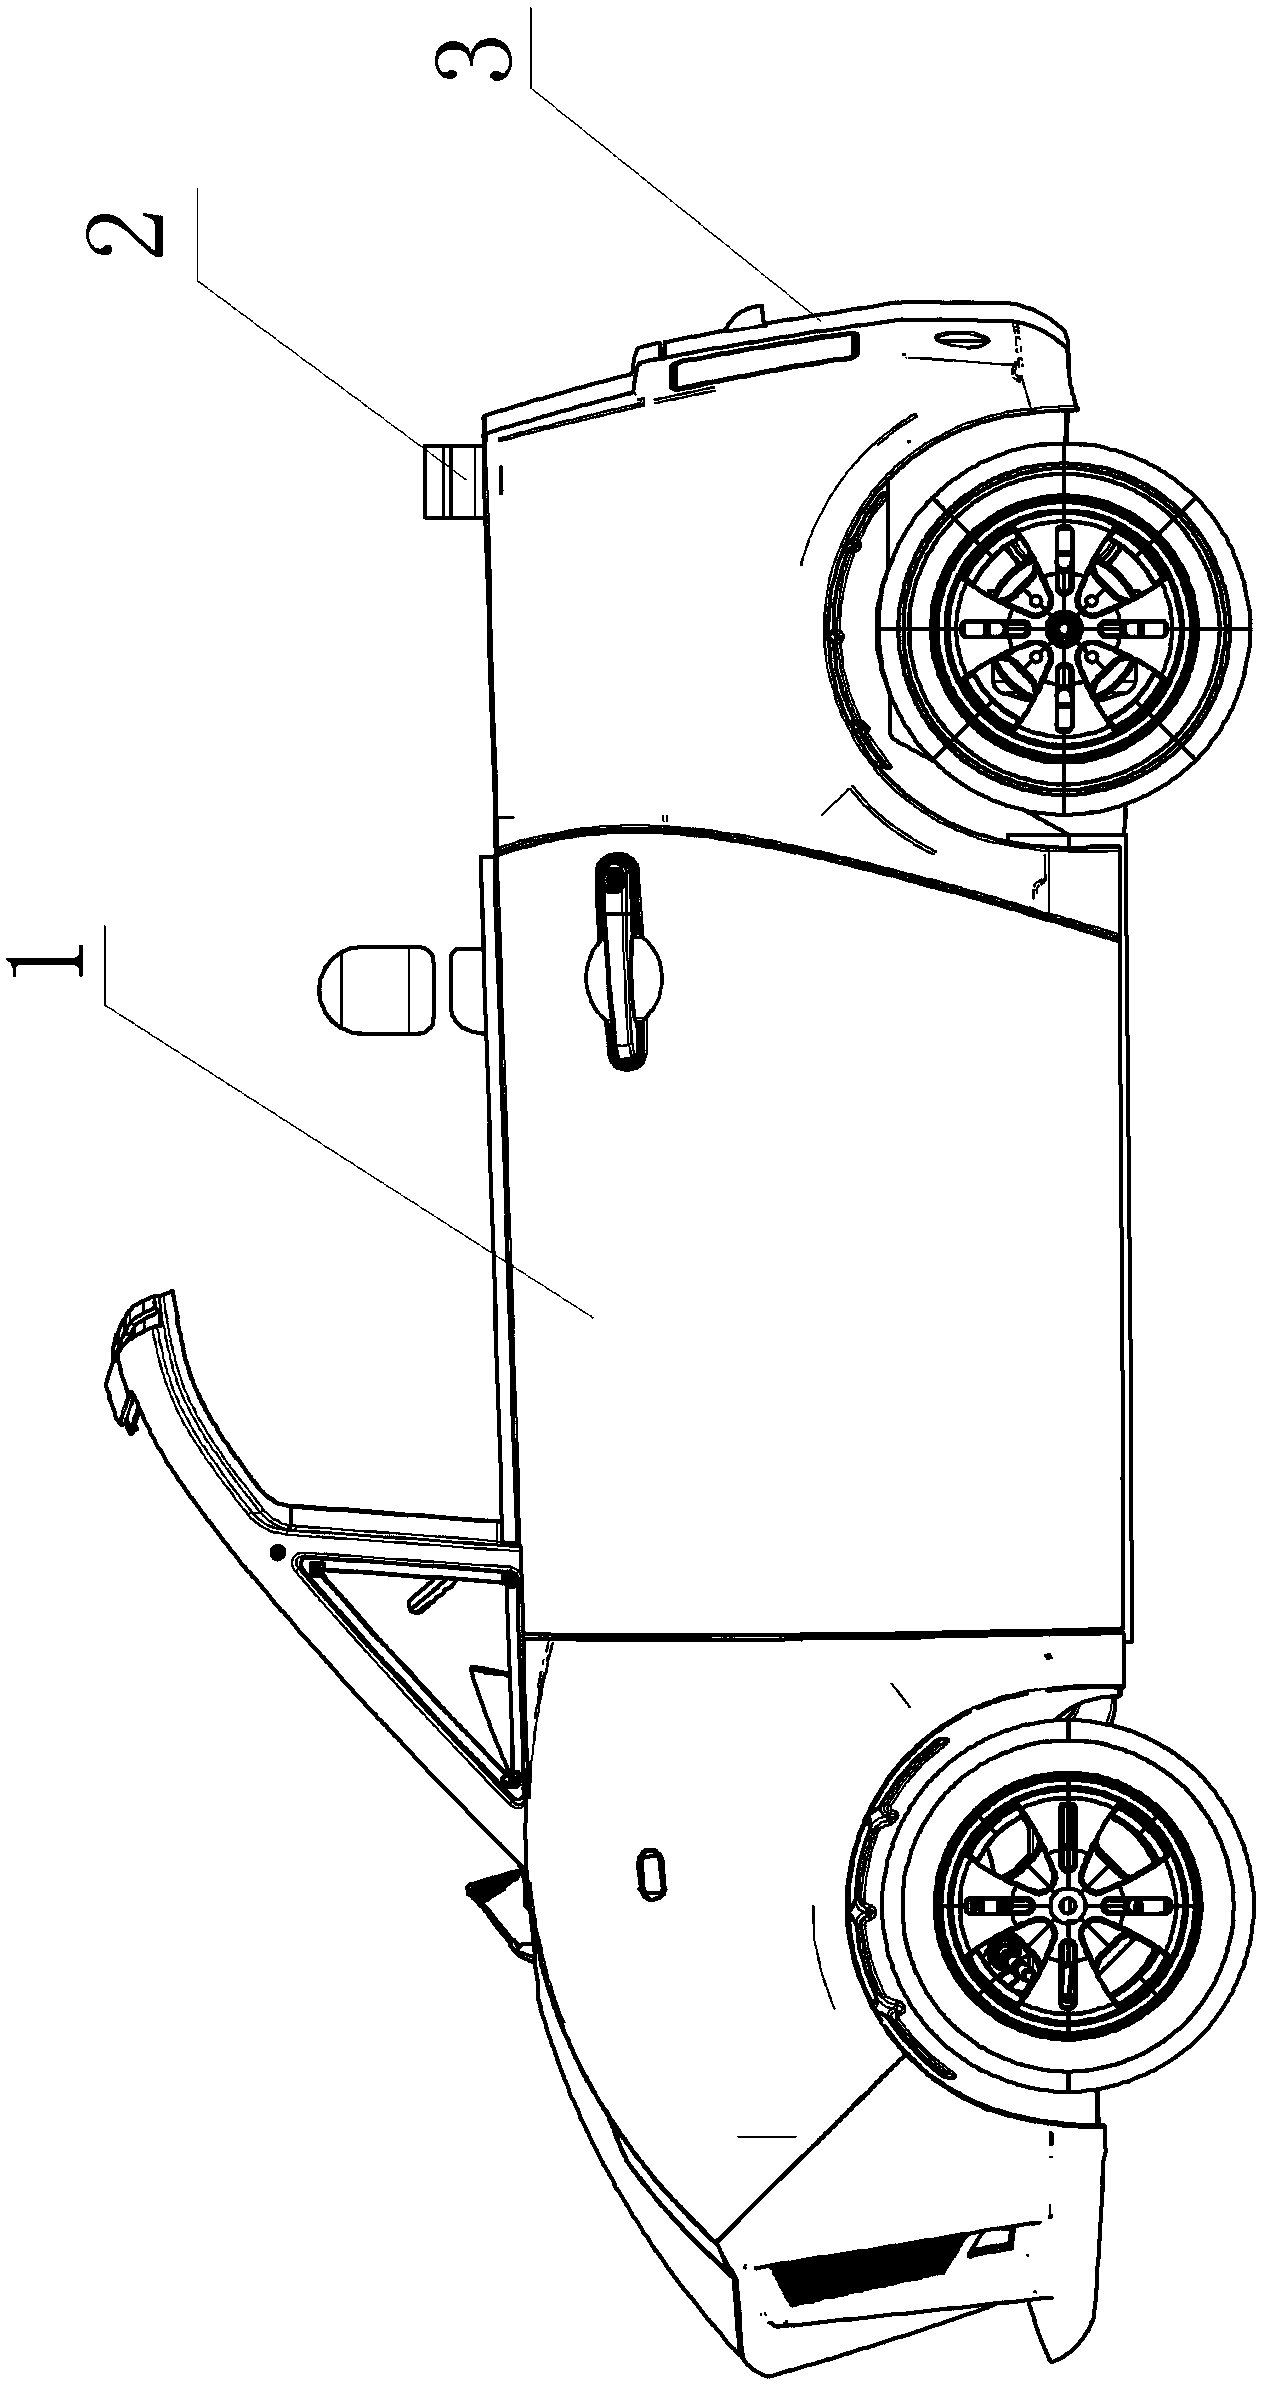 Double-row electric vehicle with telescopic cargo hopper